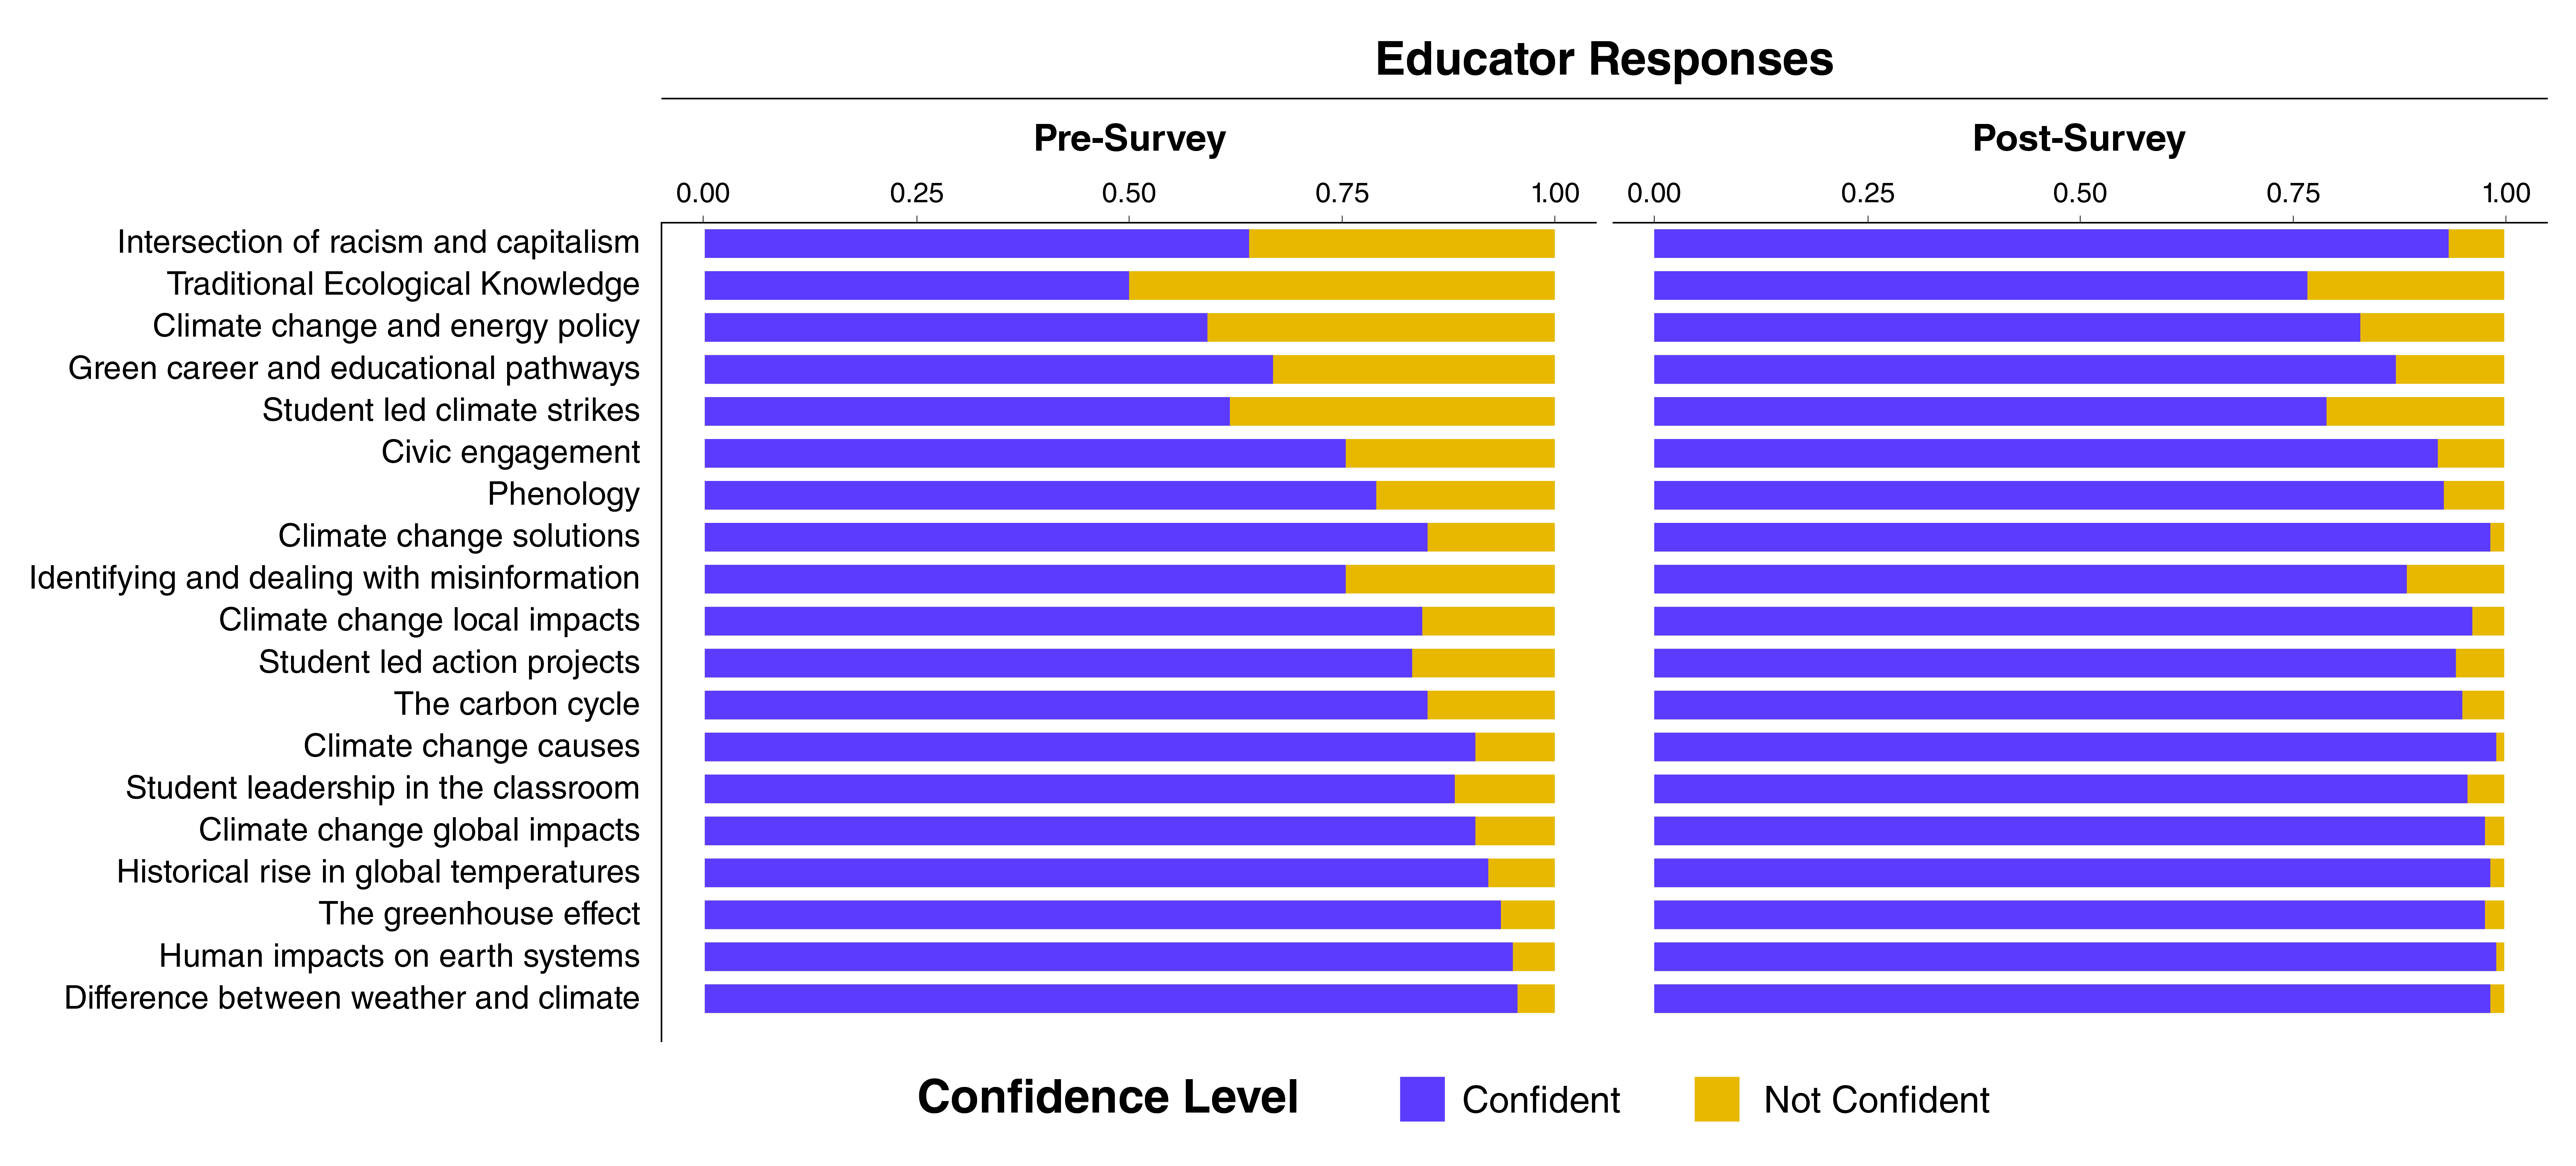 Graphic showing educator confidence in teaching about selected topics related to climate change as reported in pre and post-surveys. Educator responses for pre-surveys (N = 216) and post-surveys (N = 153) are normalized to the total number of surveys.